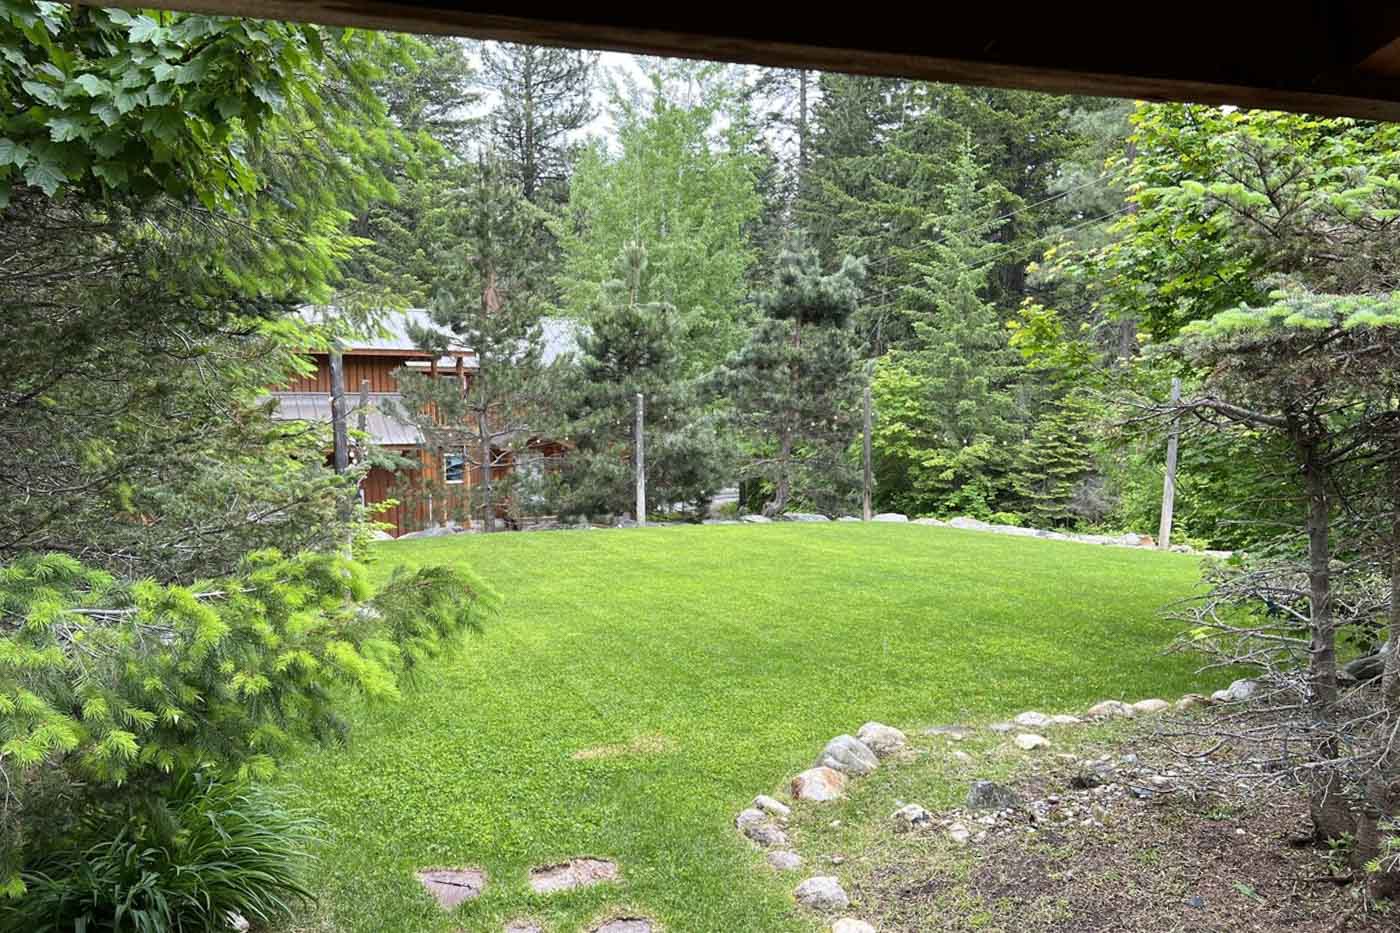 A view over a well groomed back yard surrounded by trees and a wooden cabin in the distance.